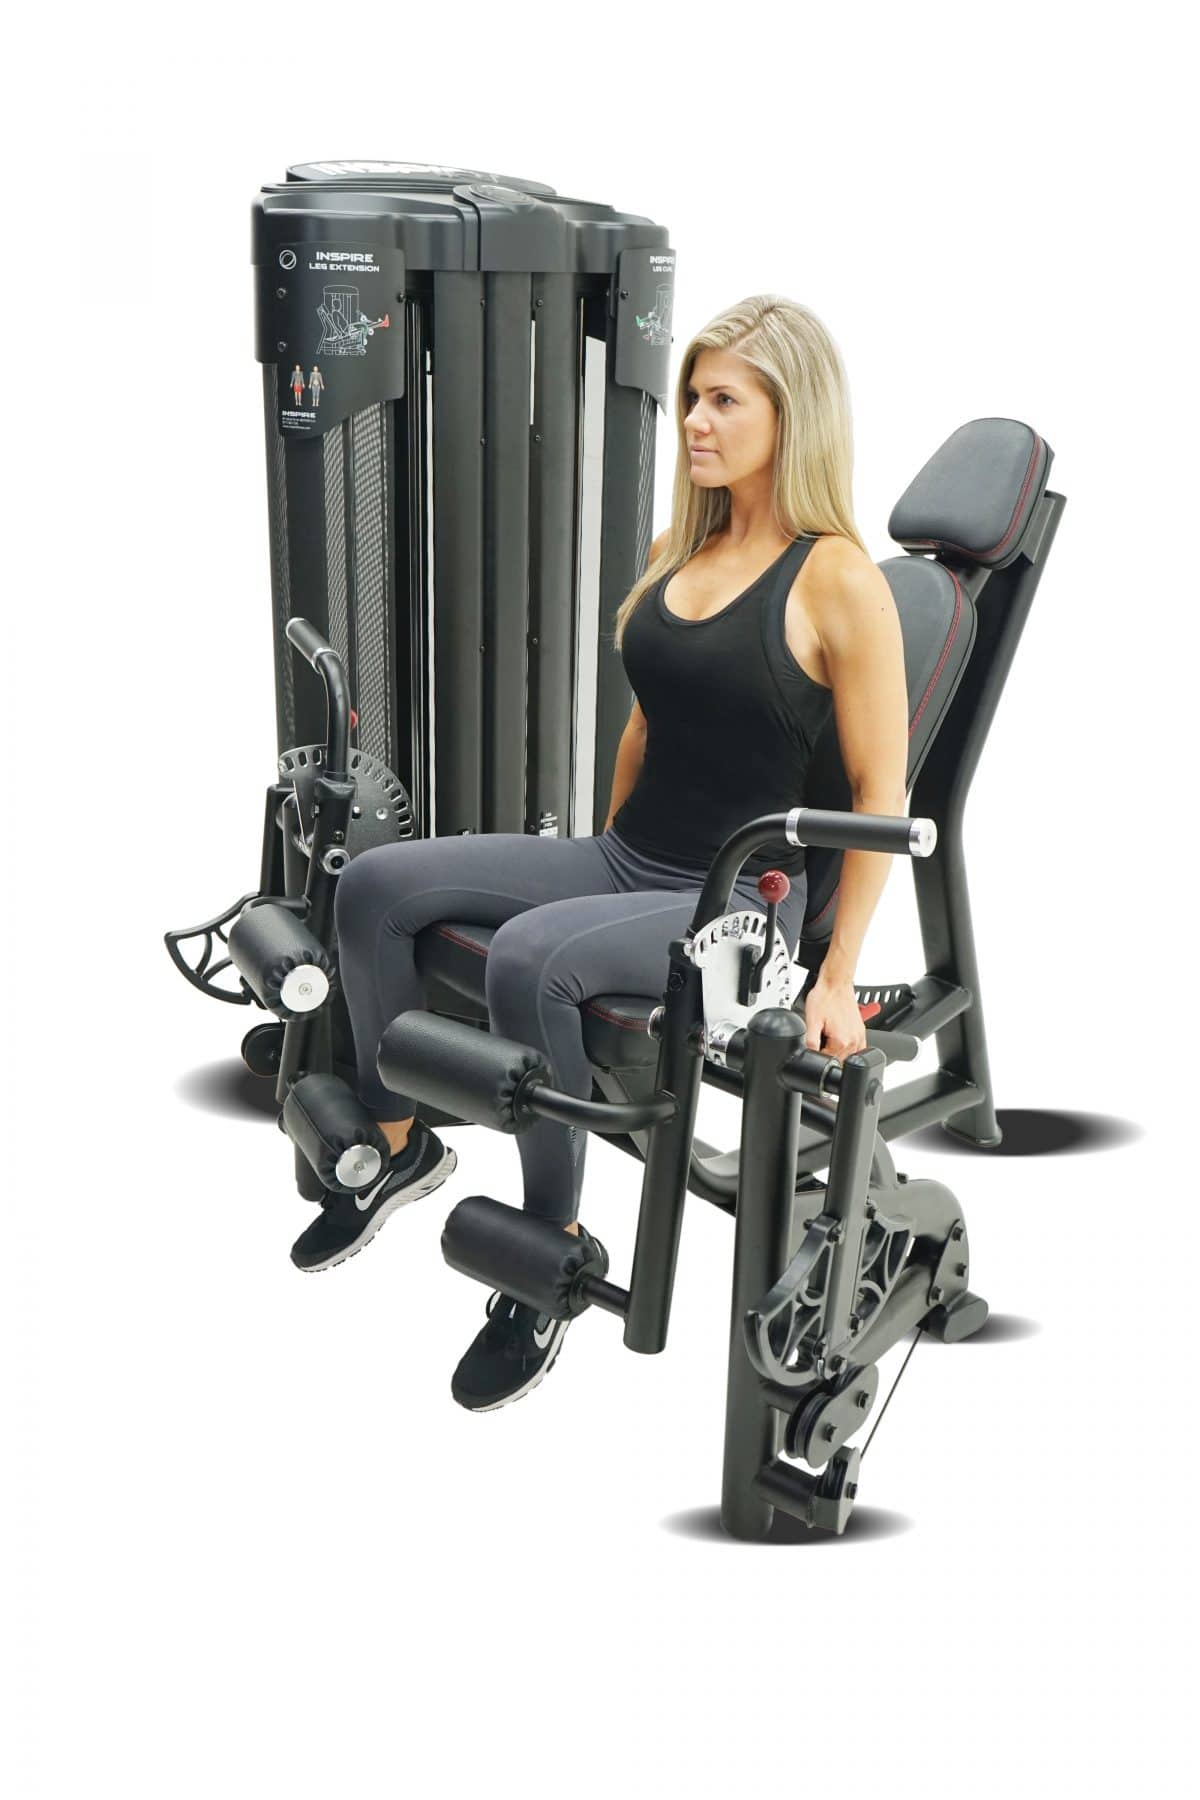 A woman sitting on an exercise machine.